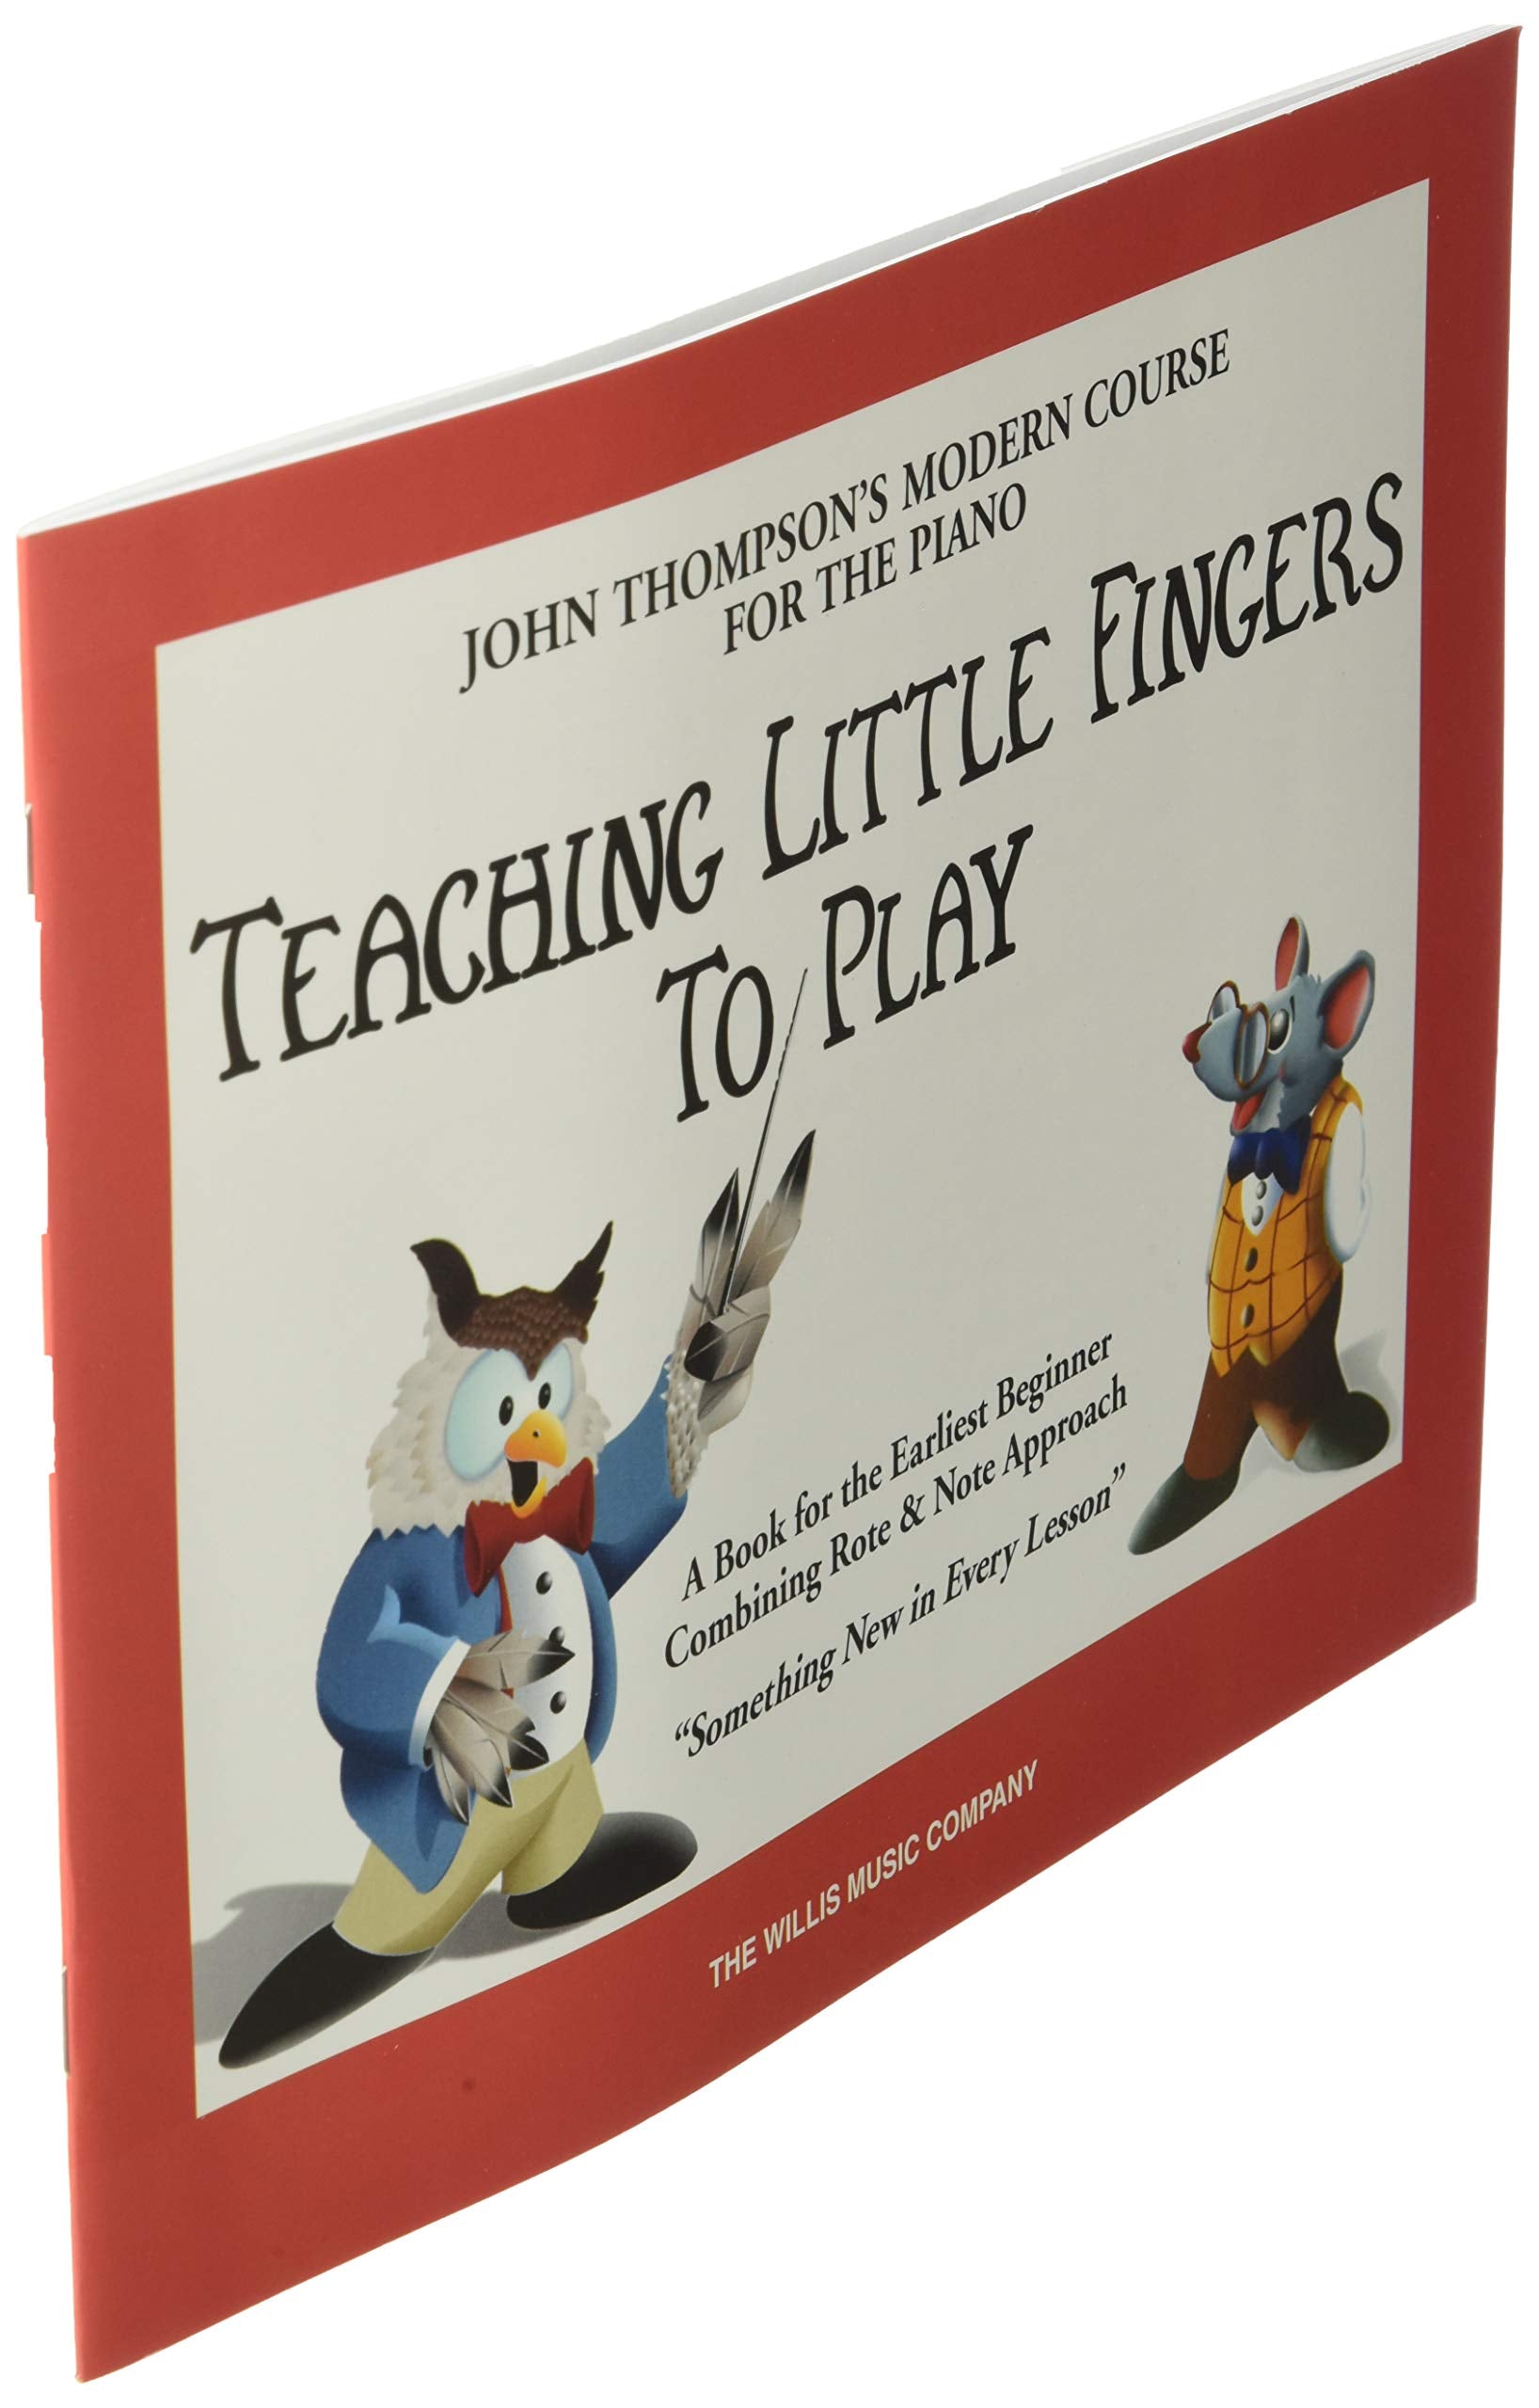 Teaching Little Fingers to Play - John Thompsons Modern Course for The Piano - Paperback